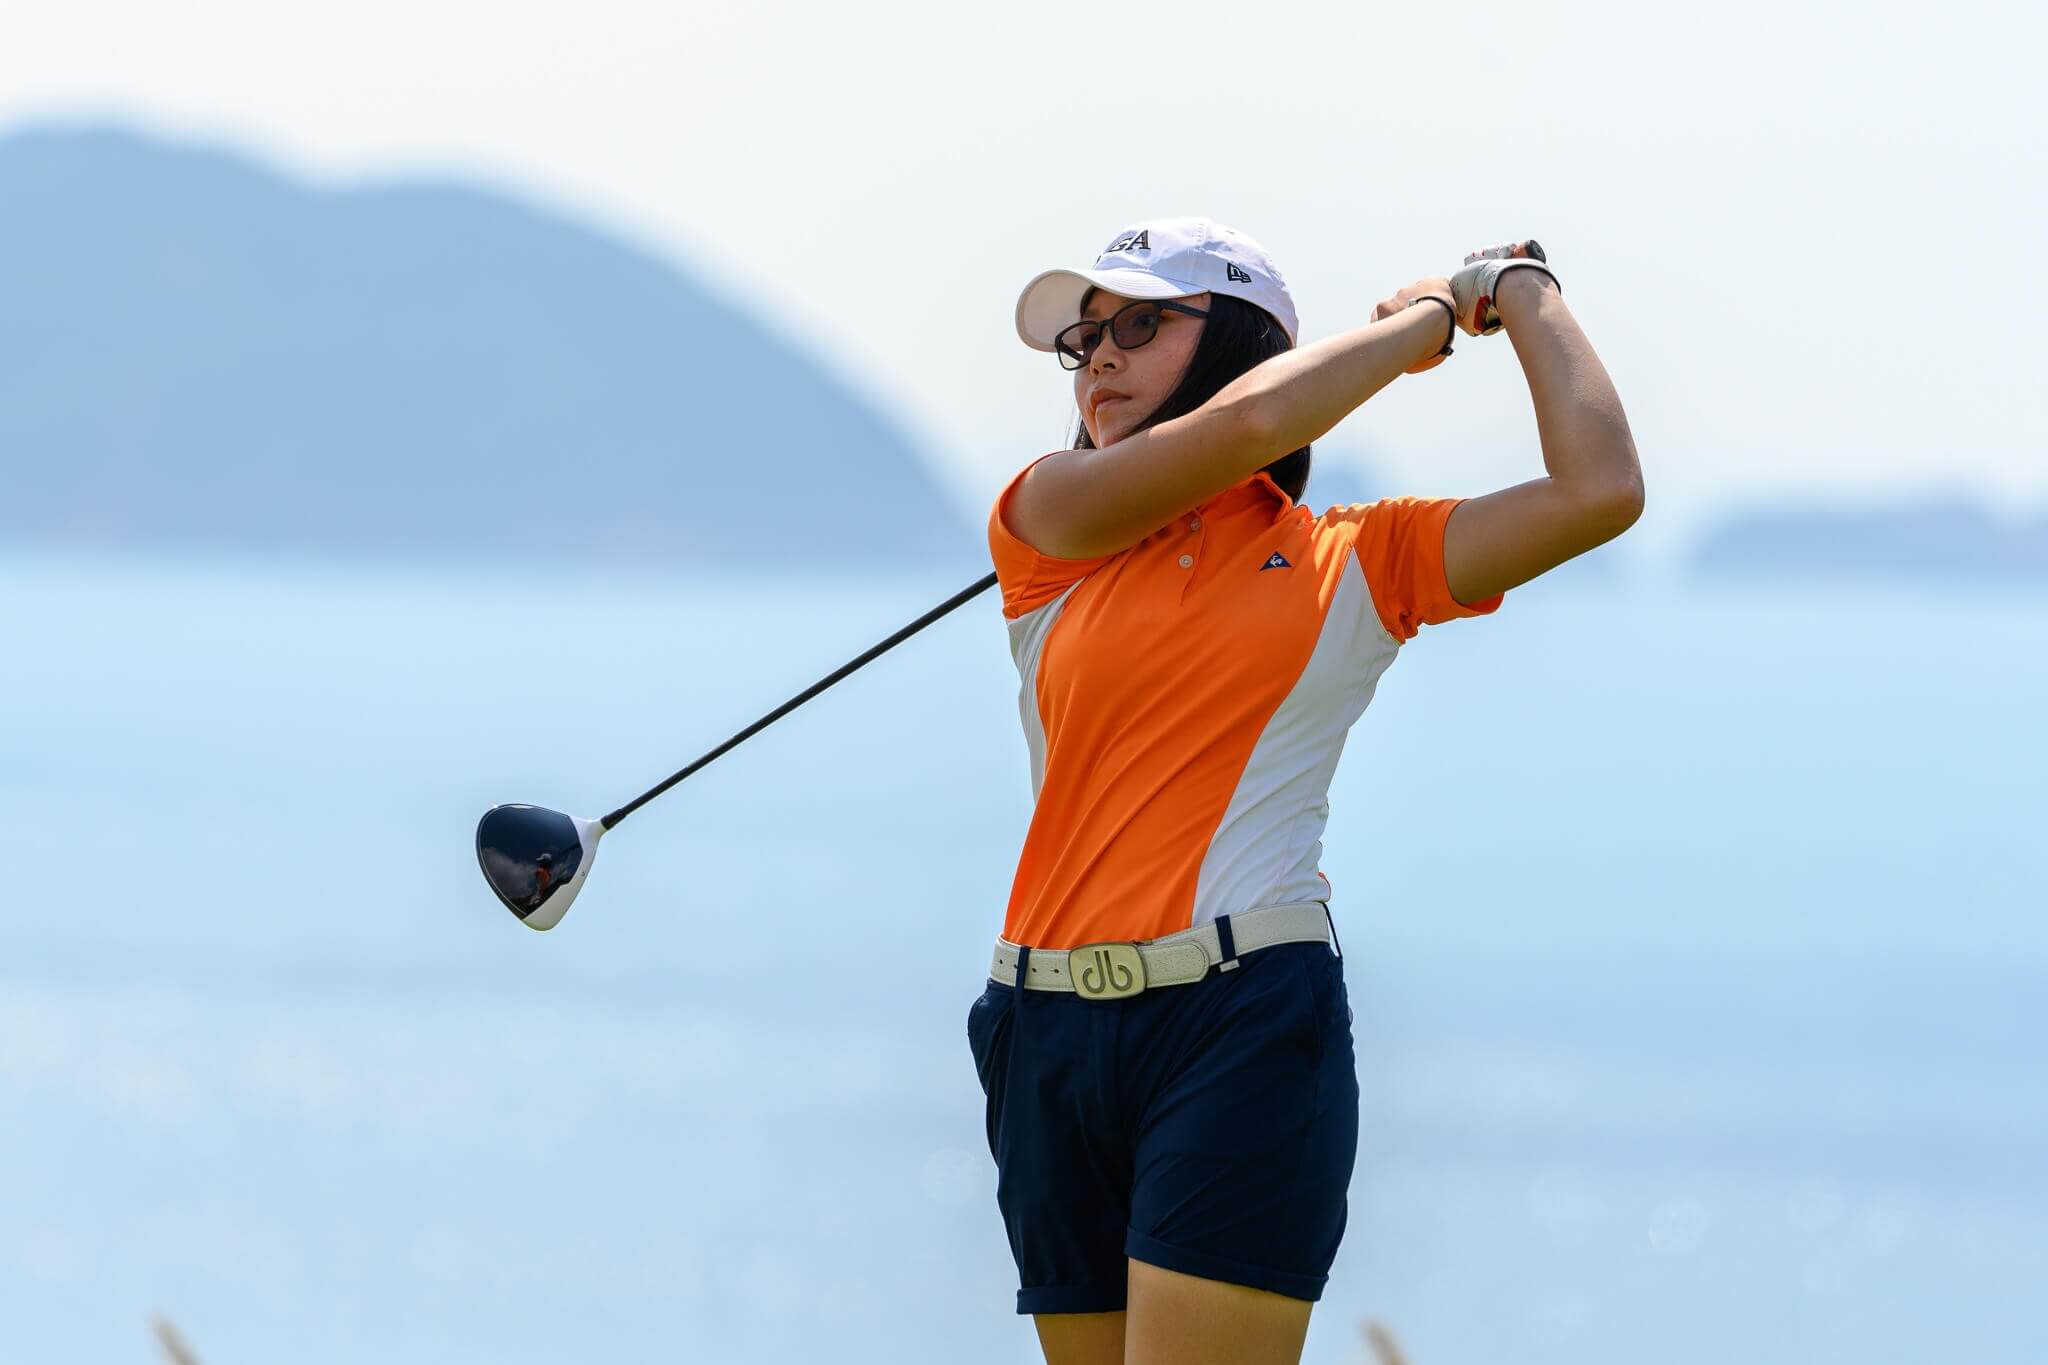 Lucky eight in search of hometown glory at EFG Hong Kong Ladies Open